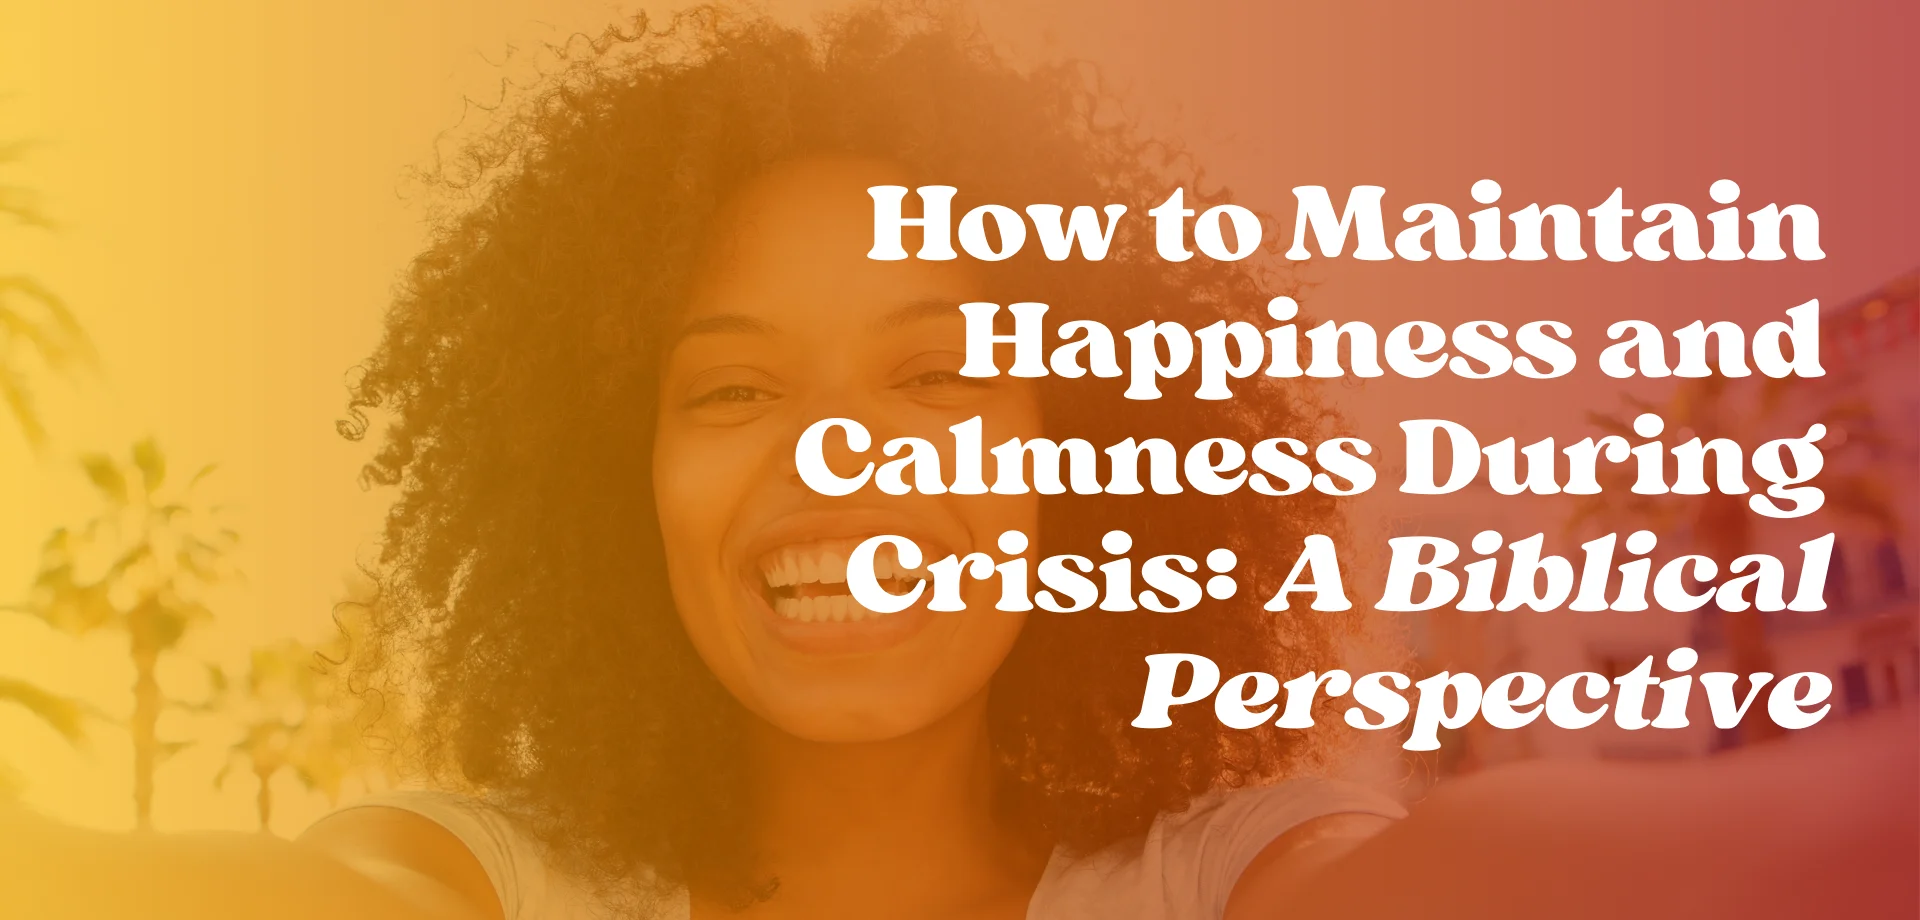 How to Maintain Happiness and Calmness During Crisis: A Biblical Perspective